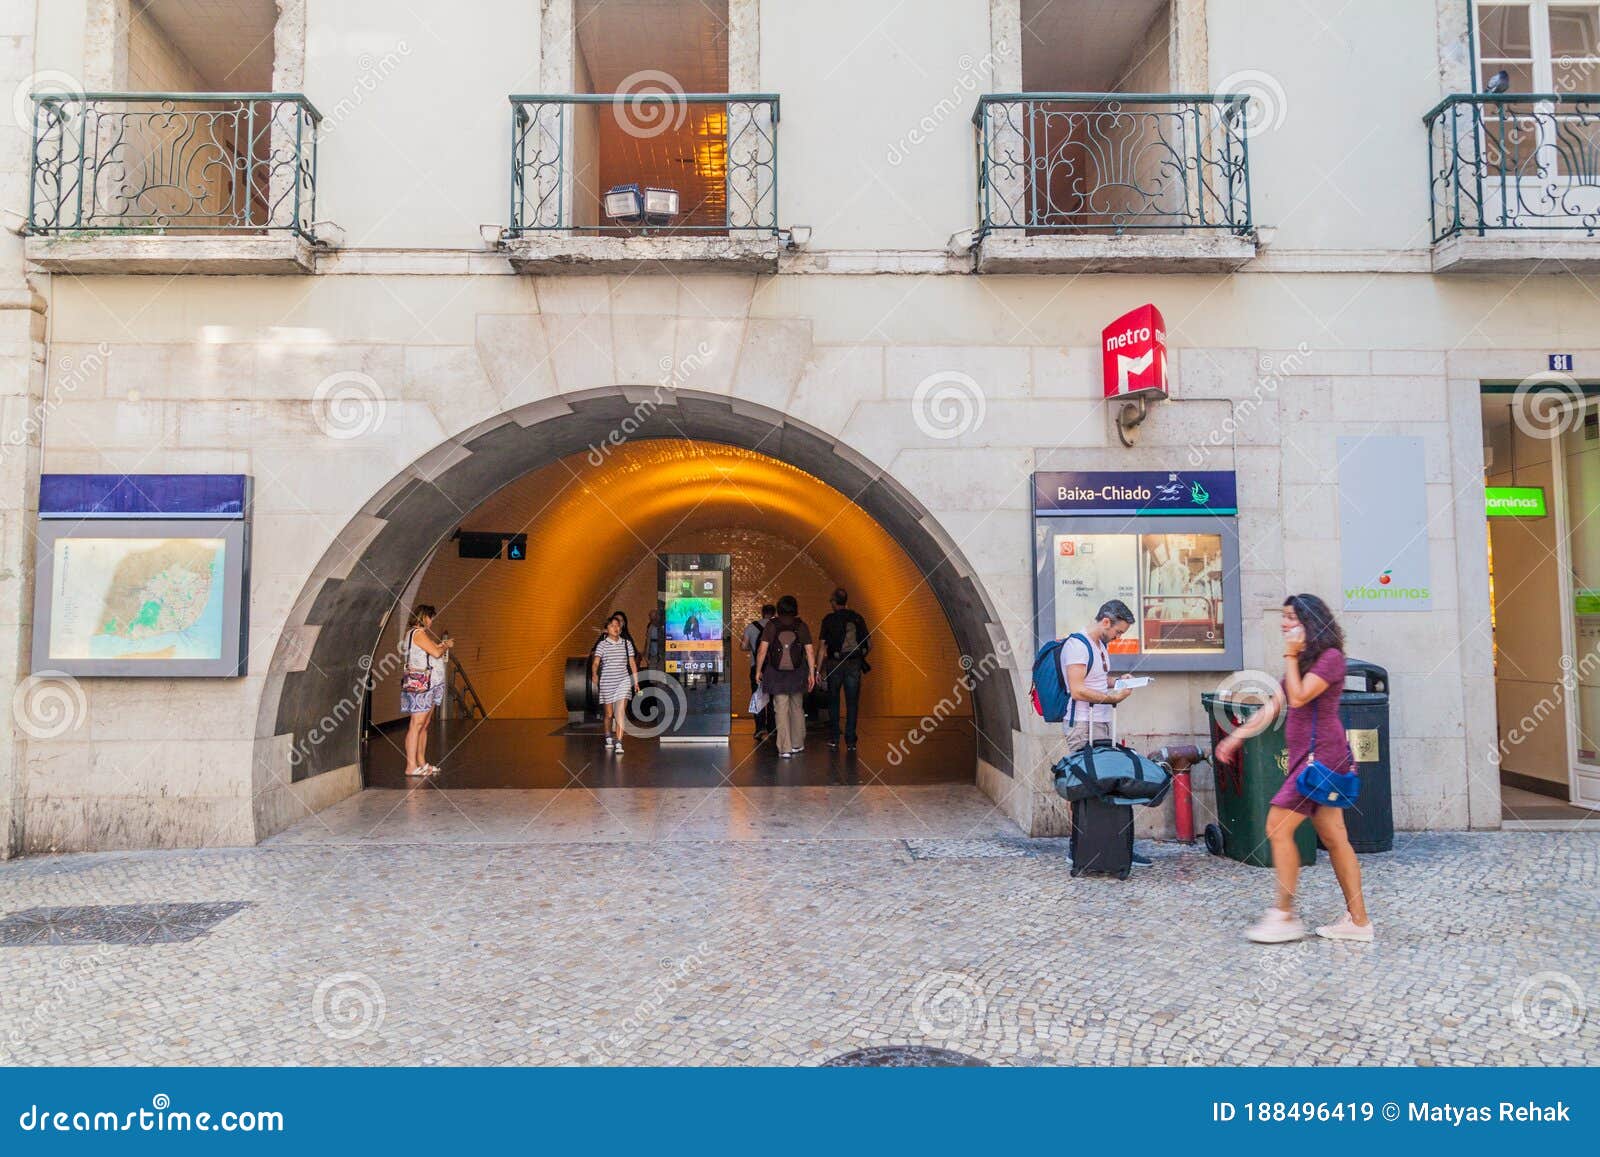 LISBON, PORTUGAL - OCTOBER 8, 2017: Entrance of the Baixa-Chiado Metro  Station in Lisbon, Portug Editorial Stock Image - Image of station,  commuters: 188496419